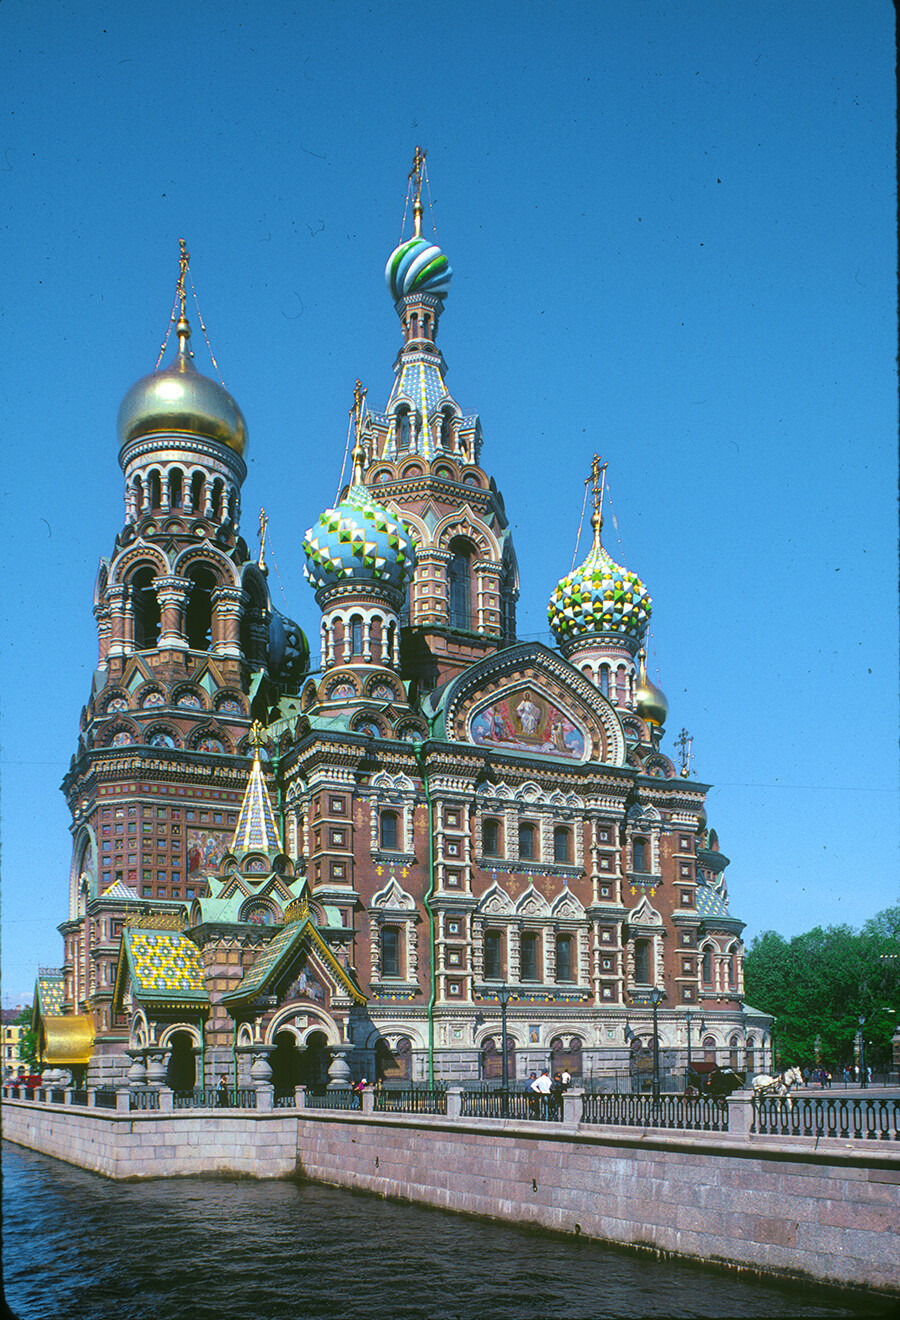 St. Petersburg. Cathedral of the Resurrection of the Savior on the Blood. Southwest view with Griboedov Canal. May 29, 1998